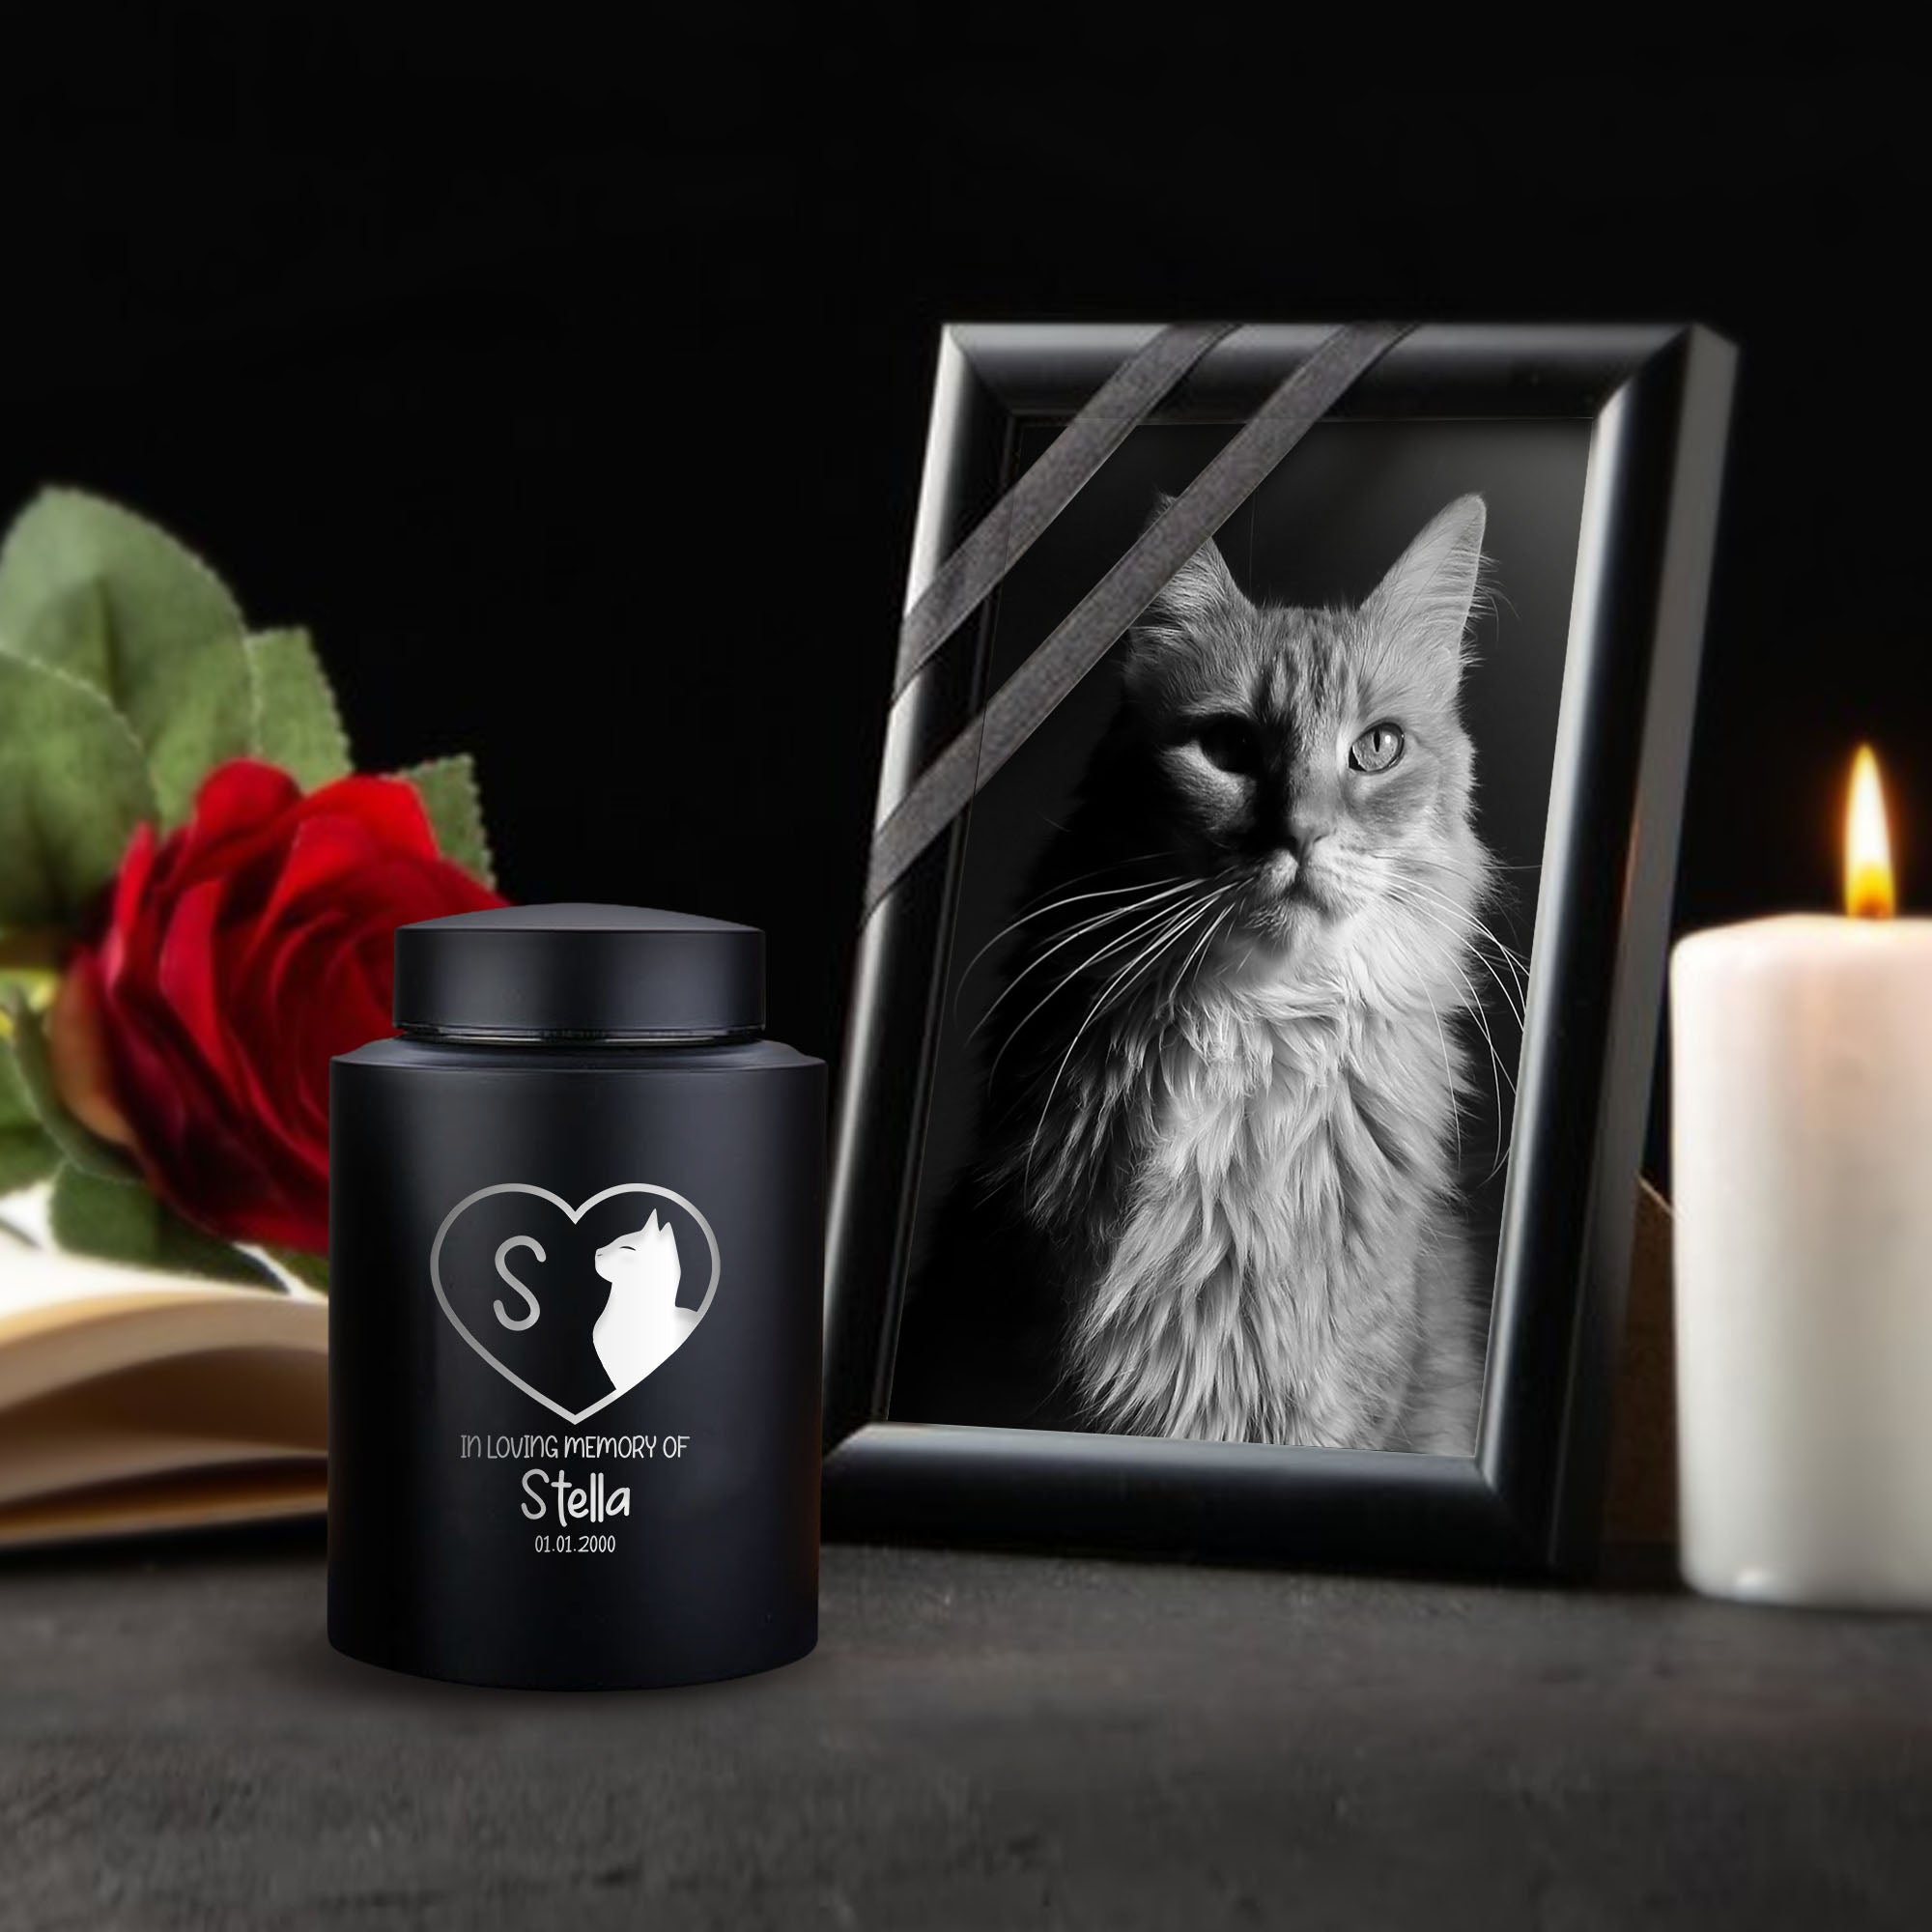 Personalized Custom Pet Cat Cremation Urn Engraved with Name, Date and Text - Round Powder Coated Steel Standard Size Urns for Cat Ashes, Pet Size 30-50lbs